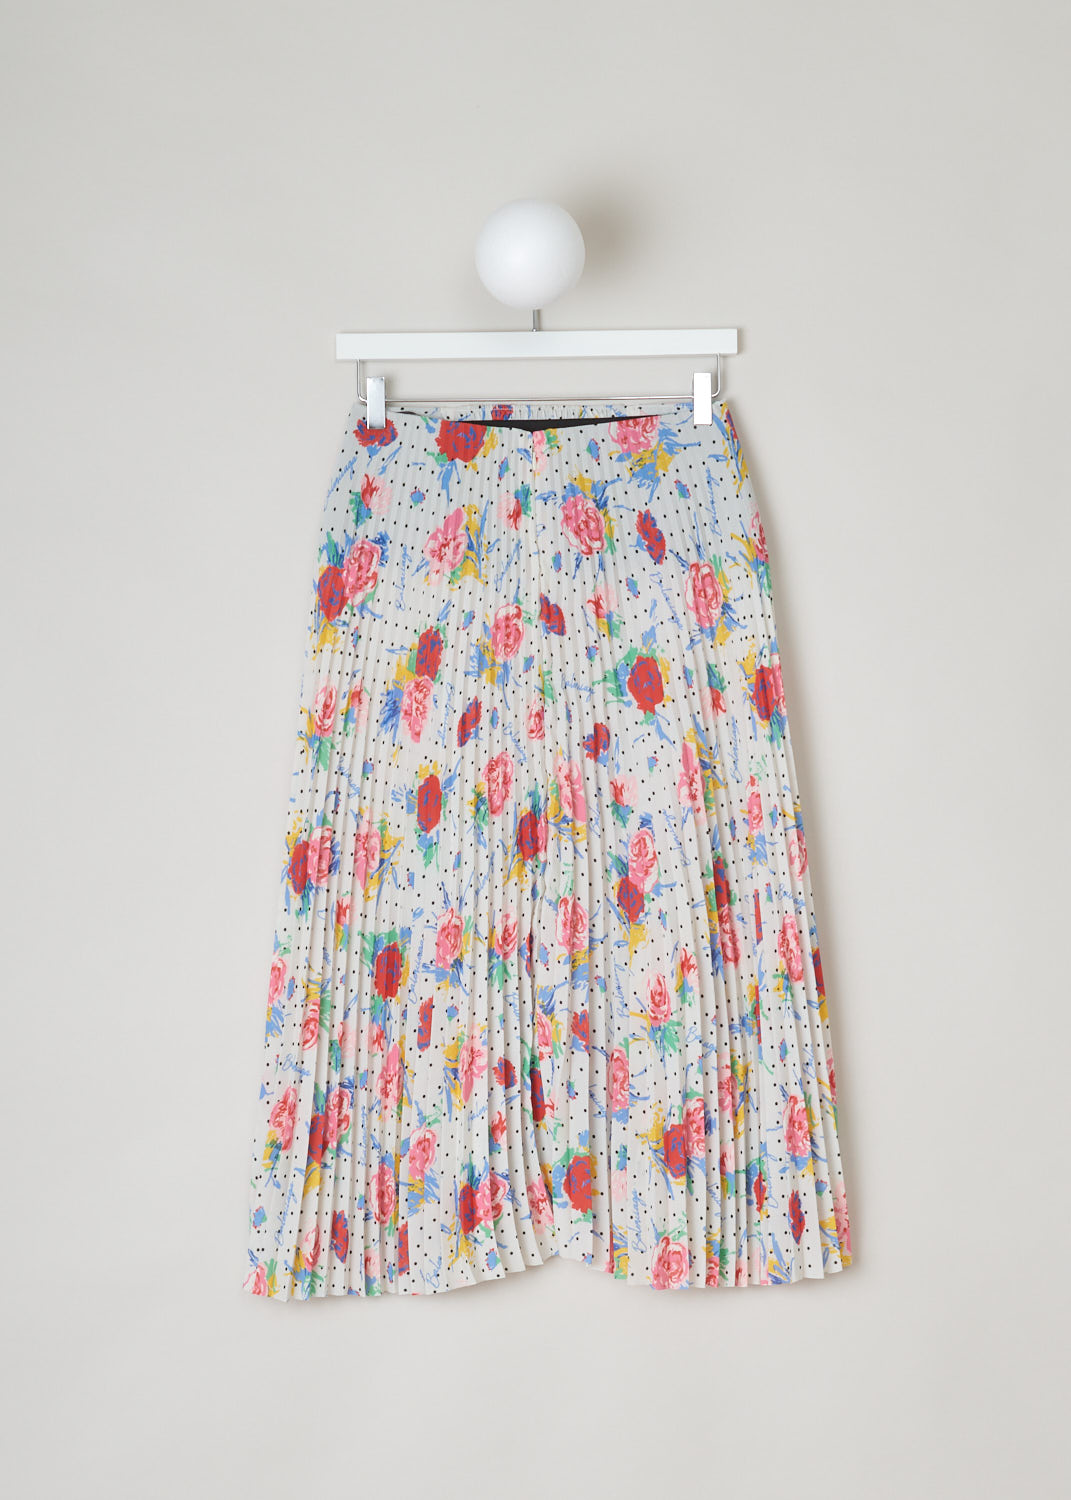 Balenciaga, Polka dot floral plissÃ© skirt, 601169_THL07_9701, white red yellow green blue, back. This high-waisted multi-colored plissÃ© skirt comes with a floral design pattern and polka dots through-out. The closure options on this piece are 2 metal hooks and beneath that a concealed zipper.